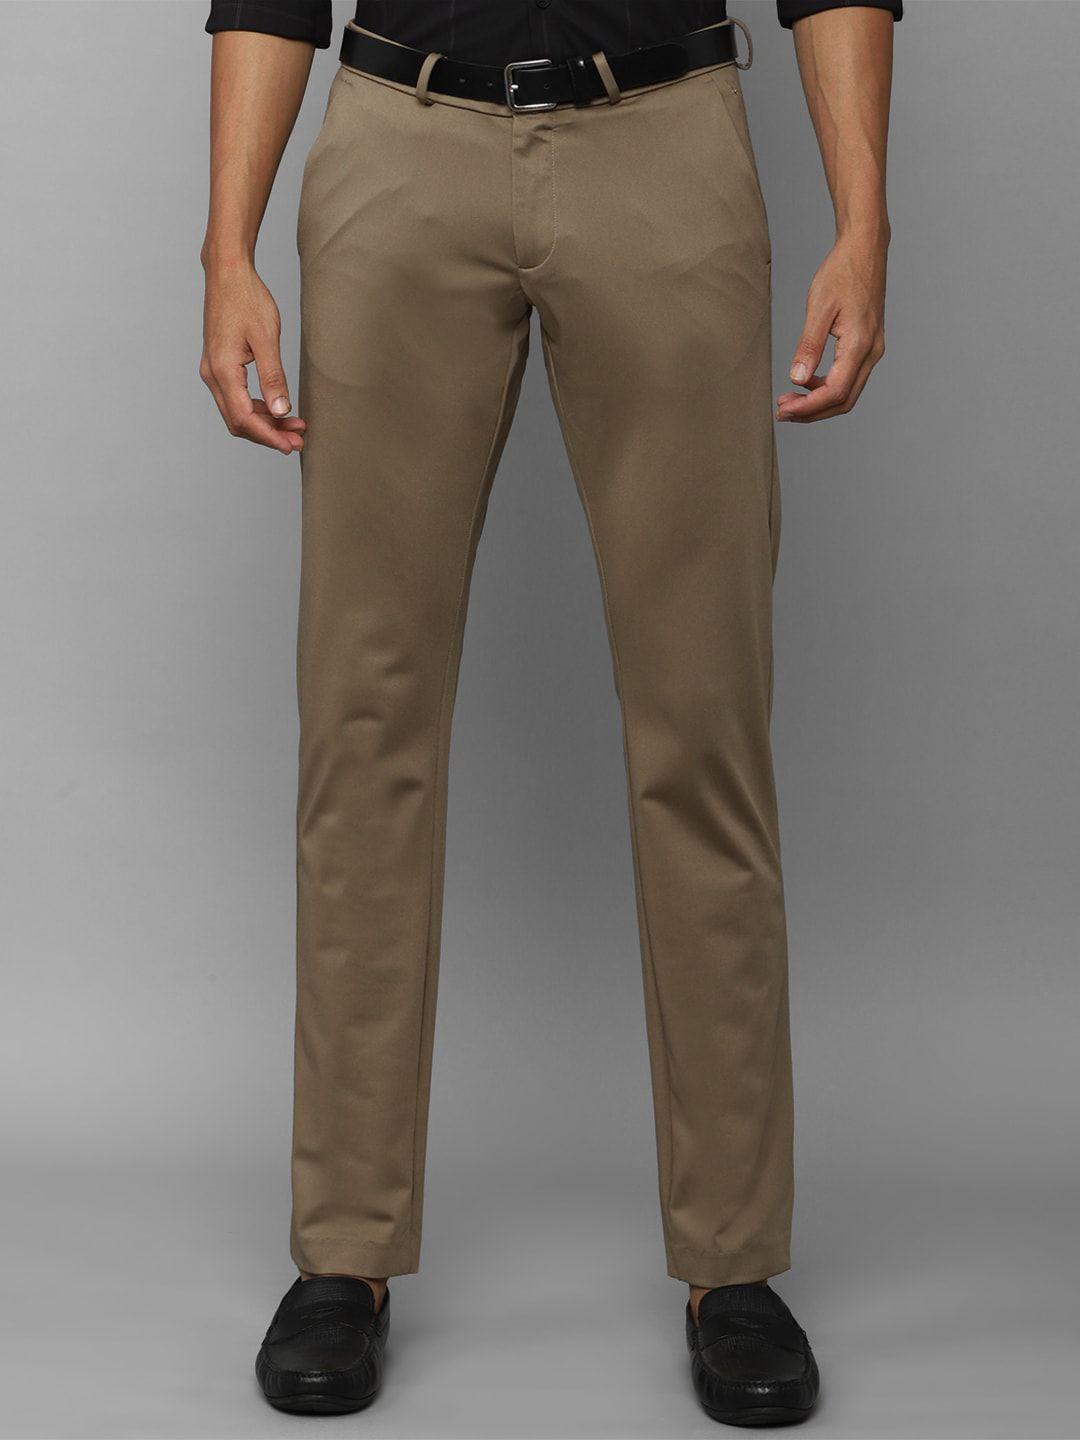 allen solly men slim fit mid-rise chinos trousers